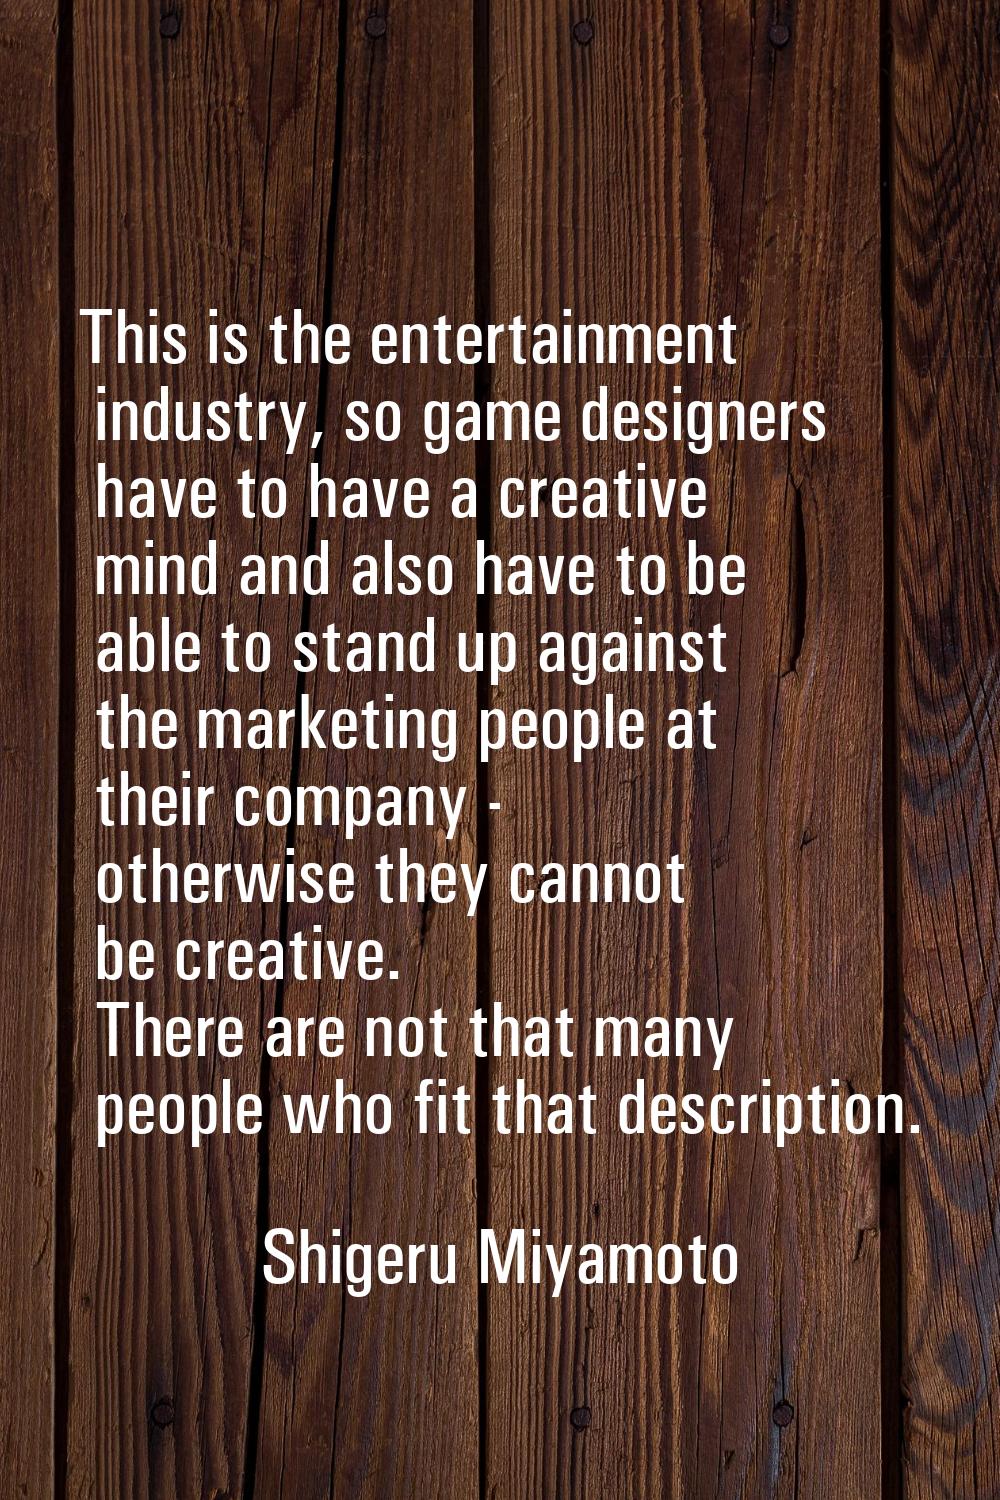 This is the entertainment industry, so game designers have to have a creative mind and also have to